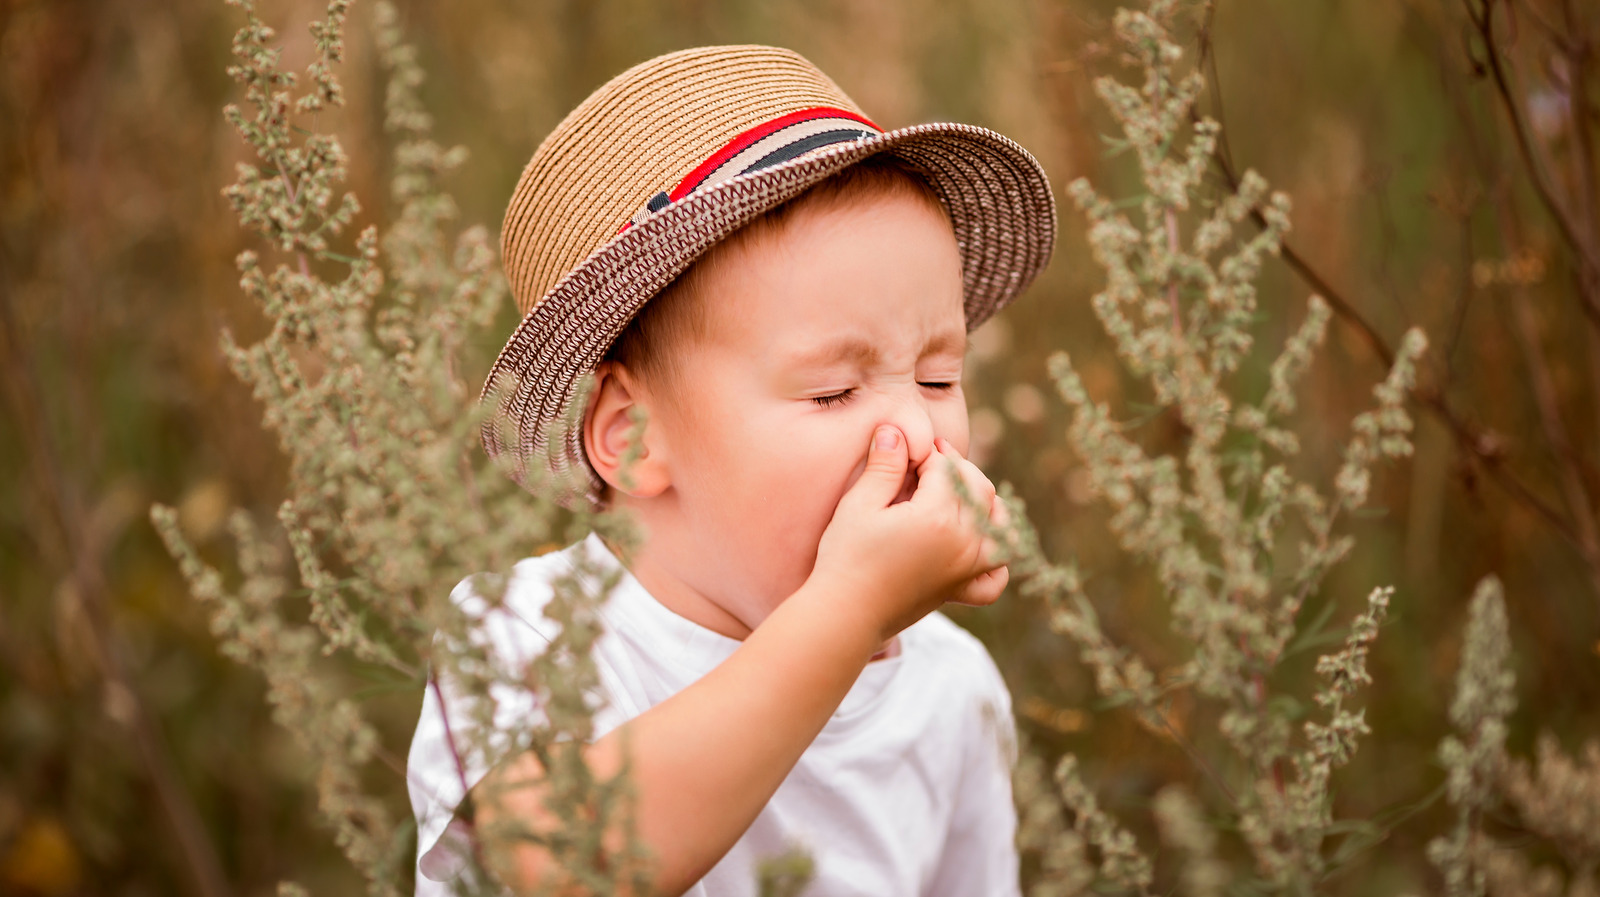 The Real Reason Your Allergies Seem Worse This Year